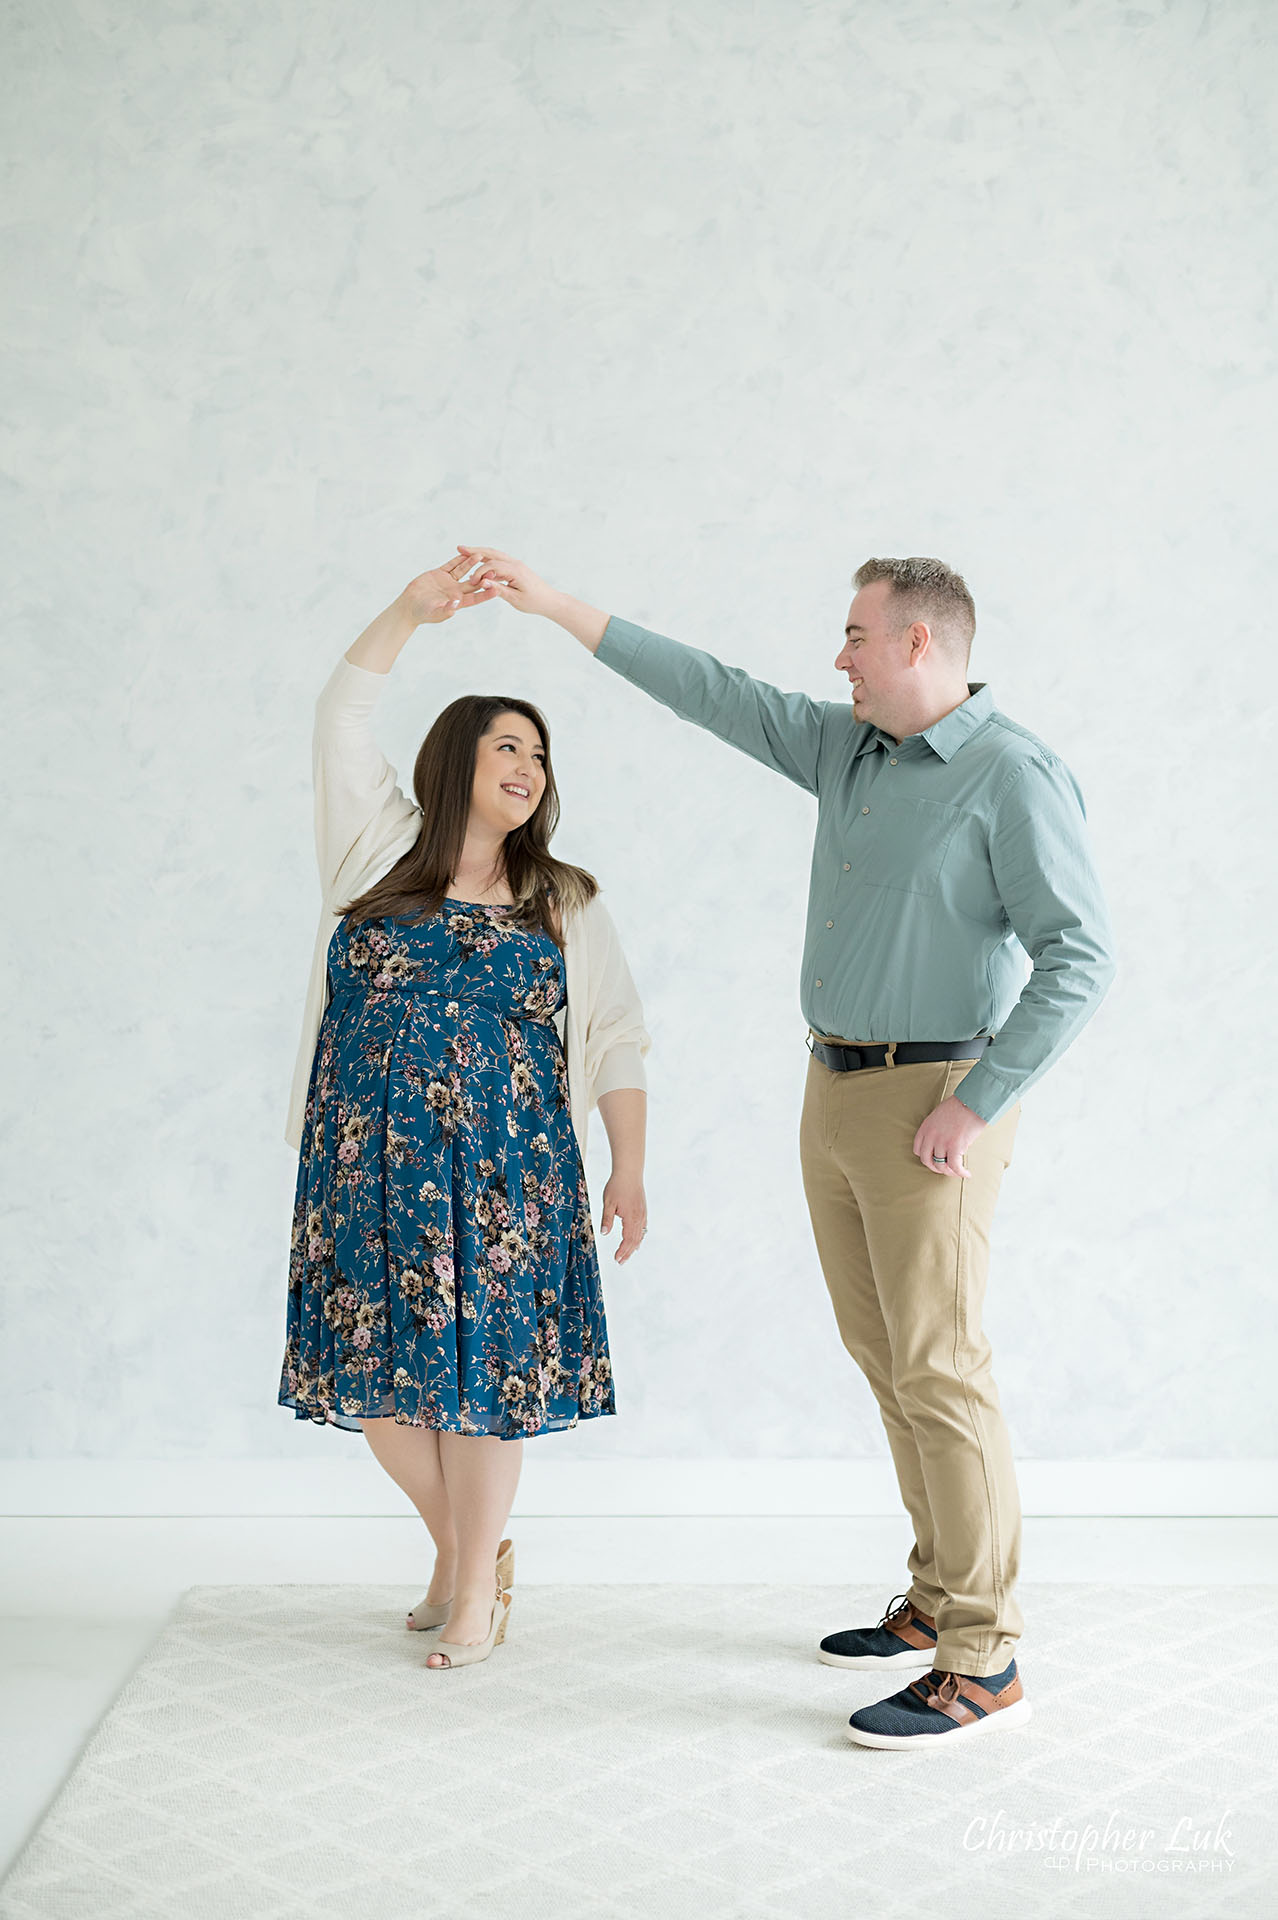 Christopher Luk Markham Pregnancy Photographer Maternity Sunday Photography Studio Candid Natural Organic Photojournalistic Mommy Daddy Mom Dad Baby Bump Dancing Twirling Spinning Fun Cute Adorable